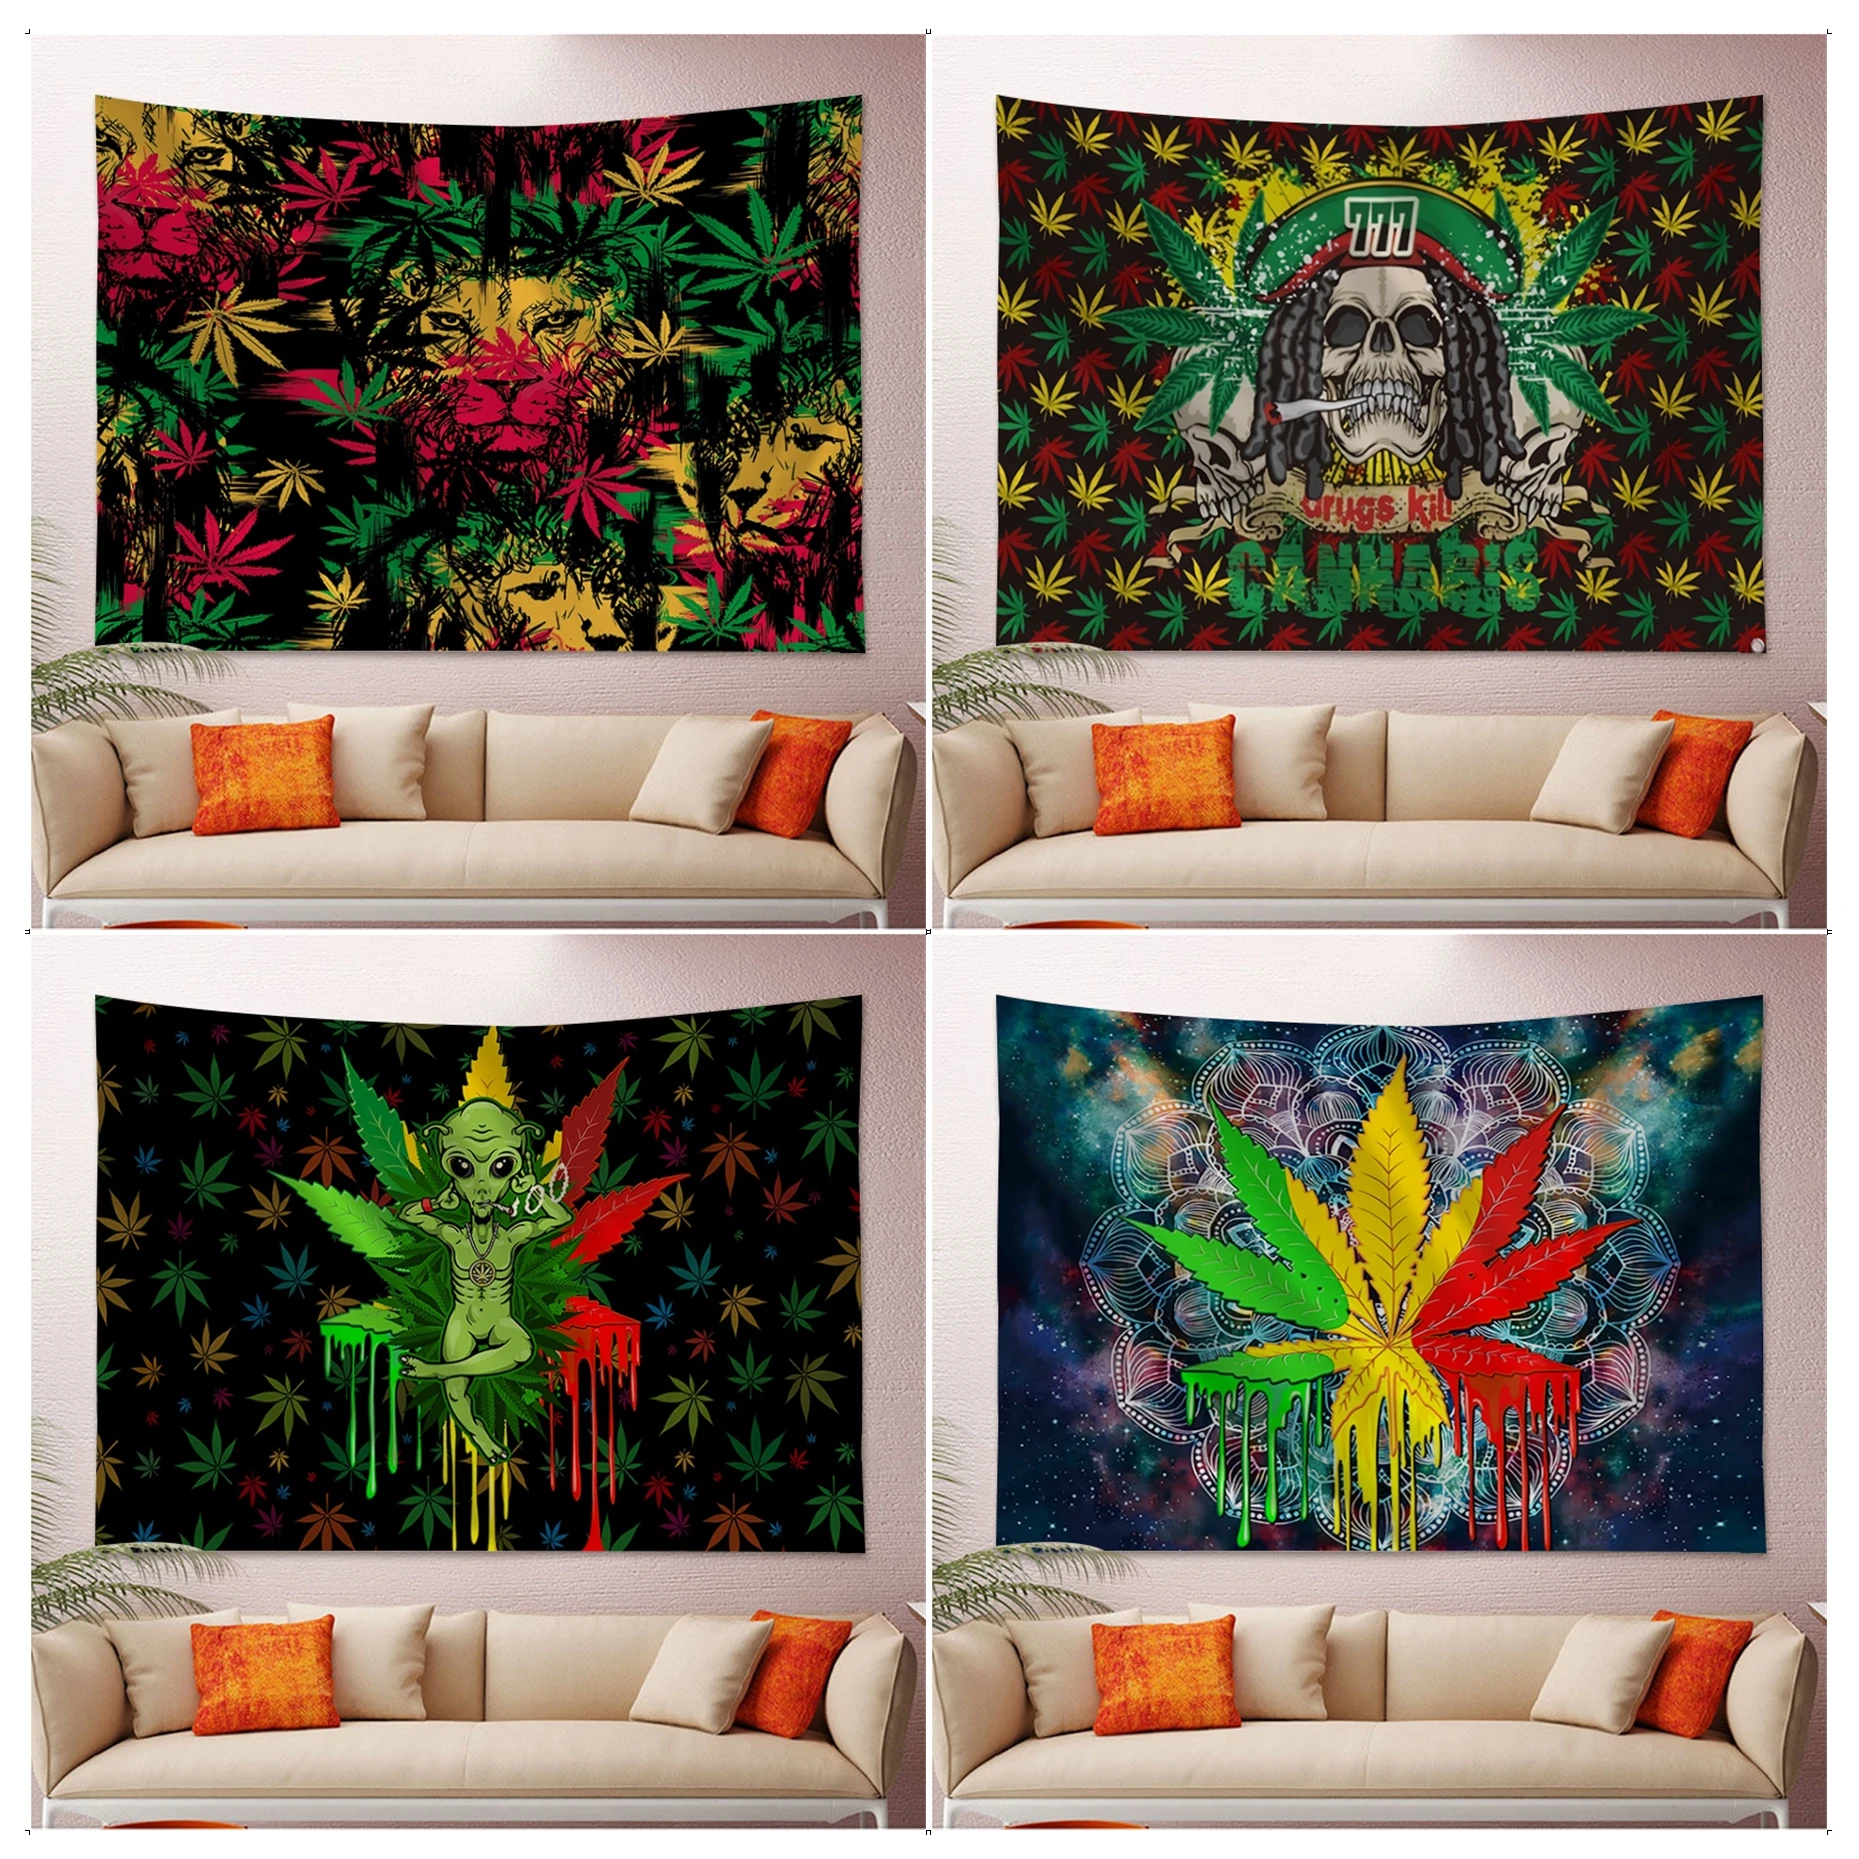 

Trippy Weed Leaf Tapestry Art Printing Hanging Tarot Hippie Wall Rugs Dorm Decor Blanket